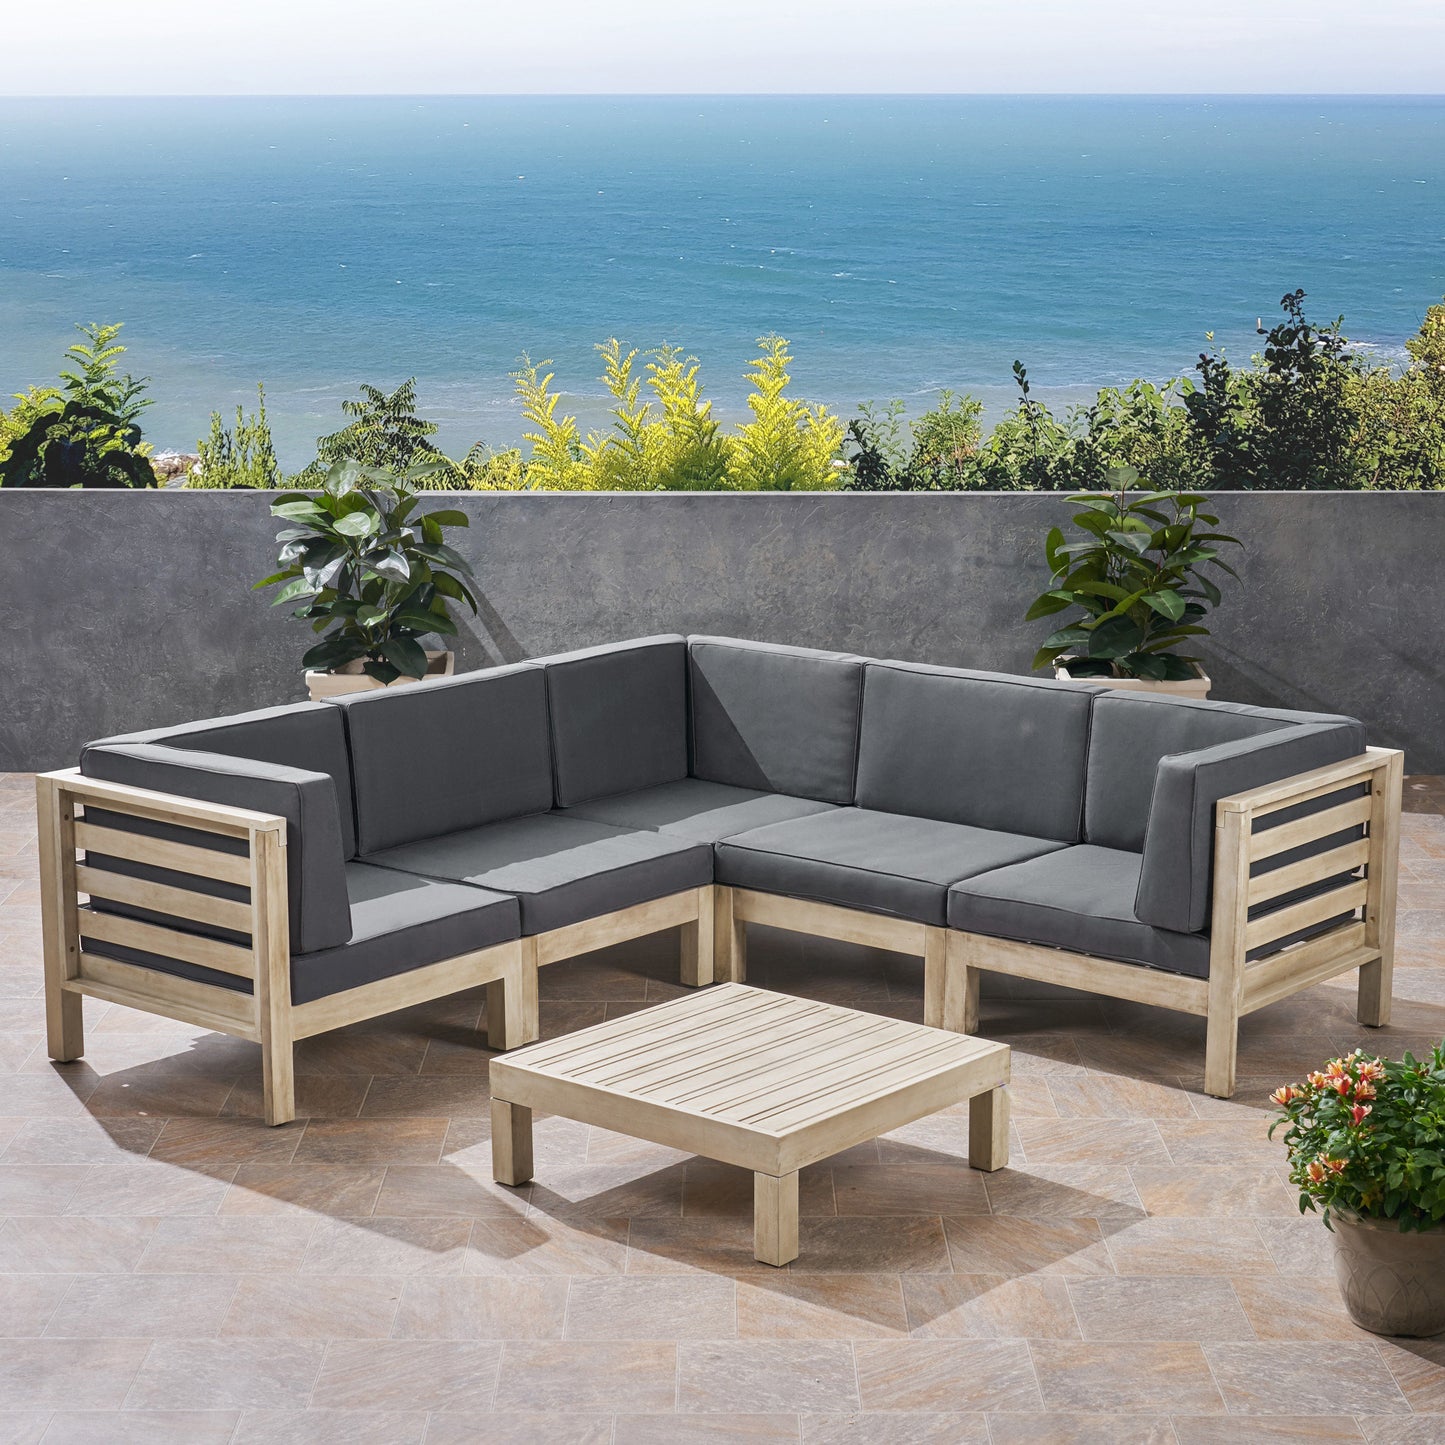 Dawson Outdoor V-Shaped Sectional Sofa Set with Coffee Table - 6-Piece 5-Seater - Acacia Wood - Outdoor Cushions - Weathered Gray and Dark Gray